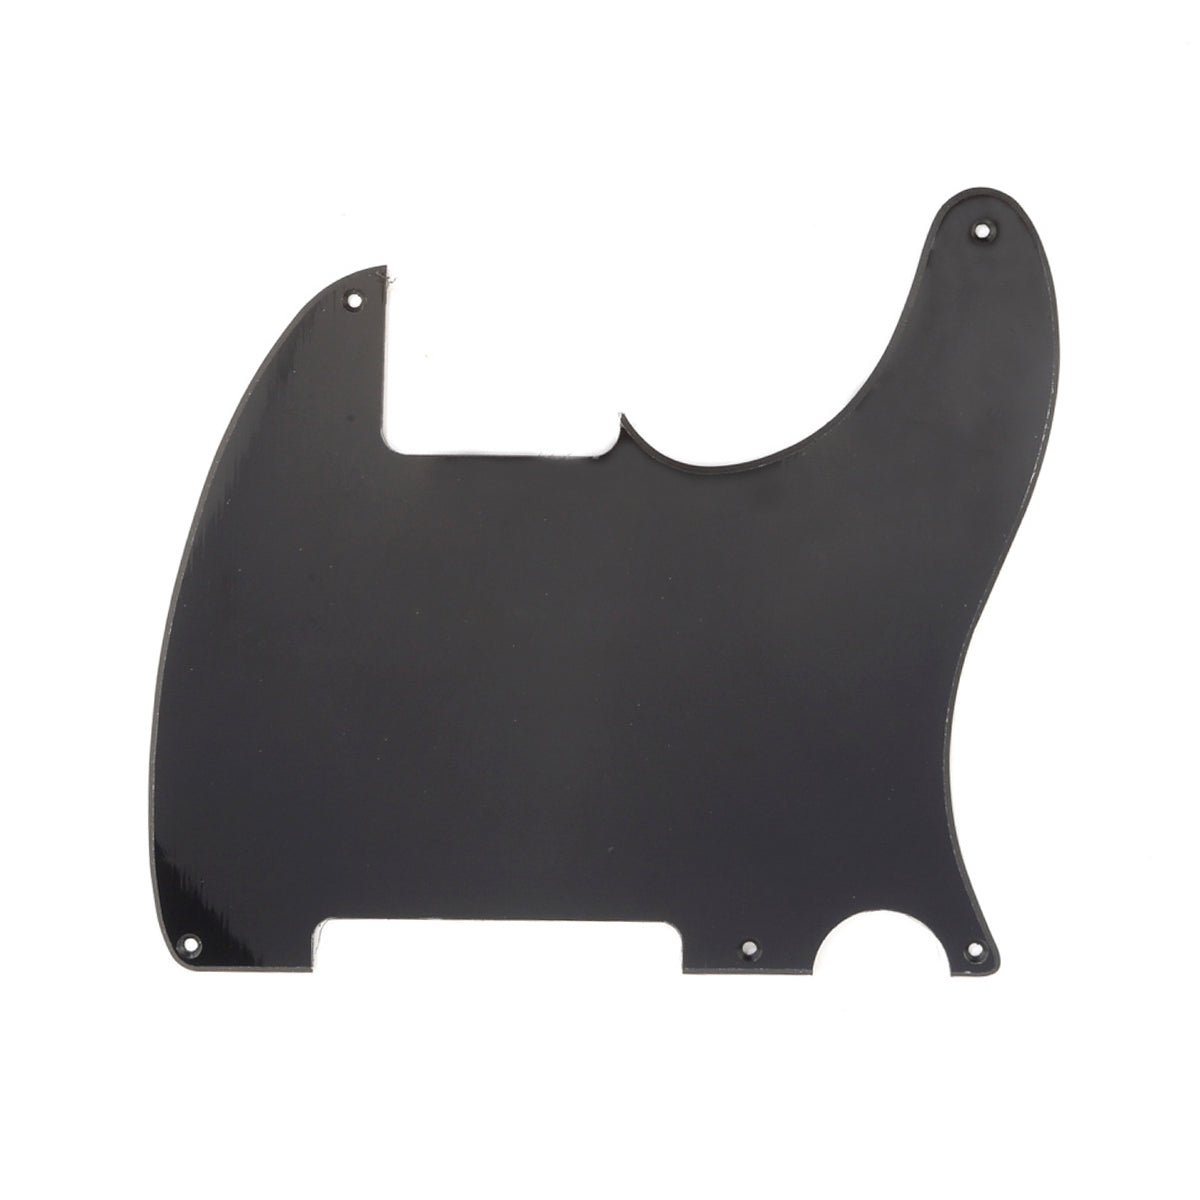 Musiclily 5 Hole Tele Pickguard Blank for Fender USA/Mexican Telecaster Esquire Guitar, 1Ply Black